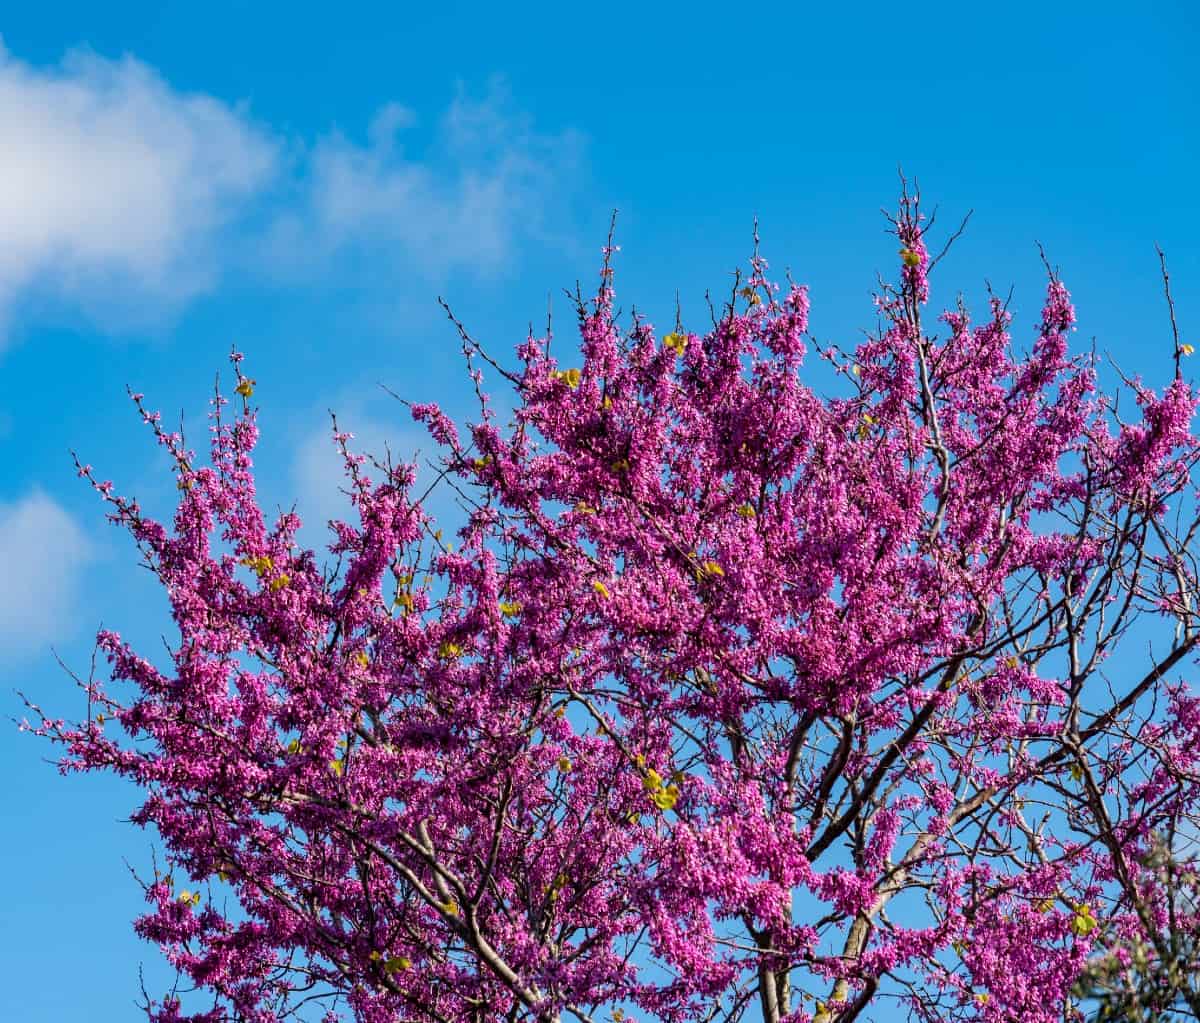 The Oklahoma redbud is one of the earliest blooming trees.